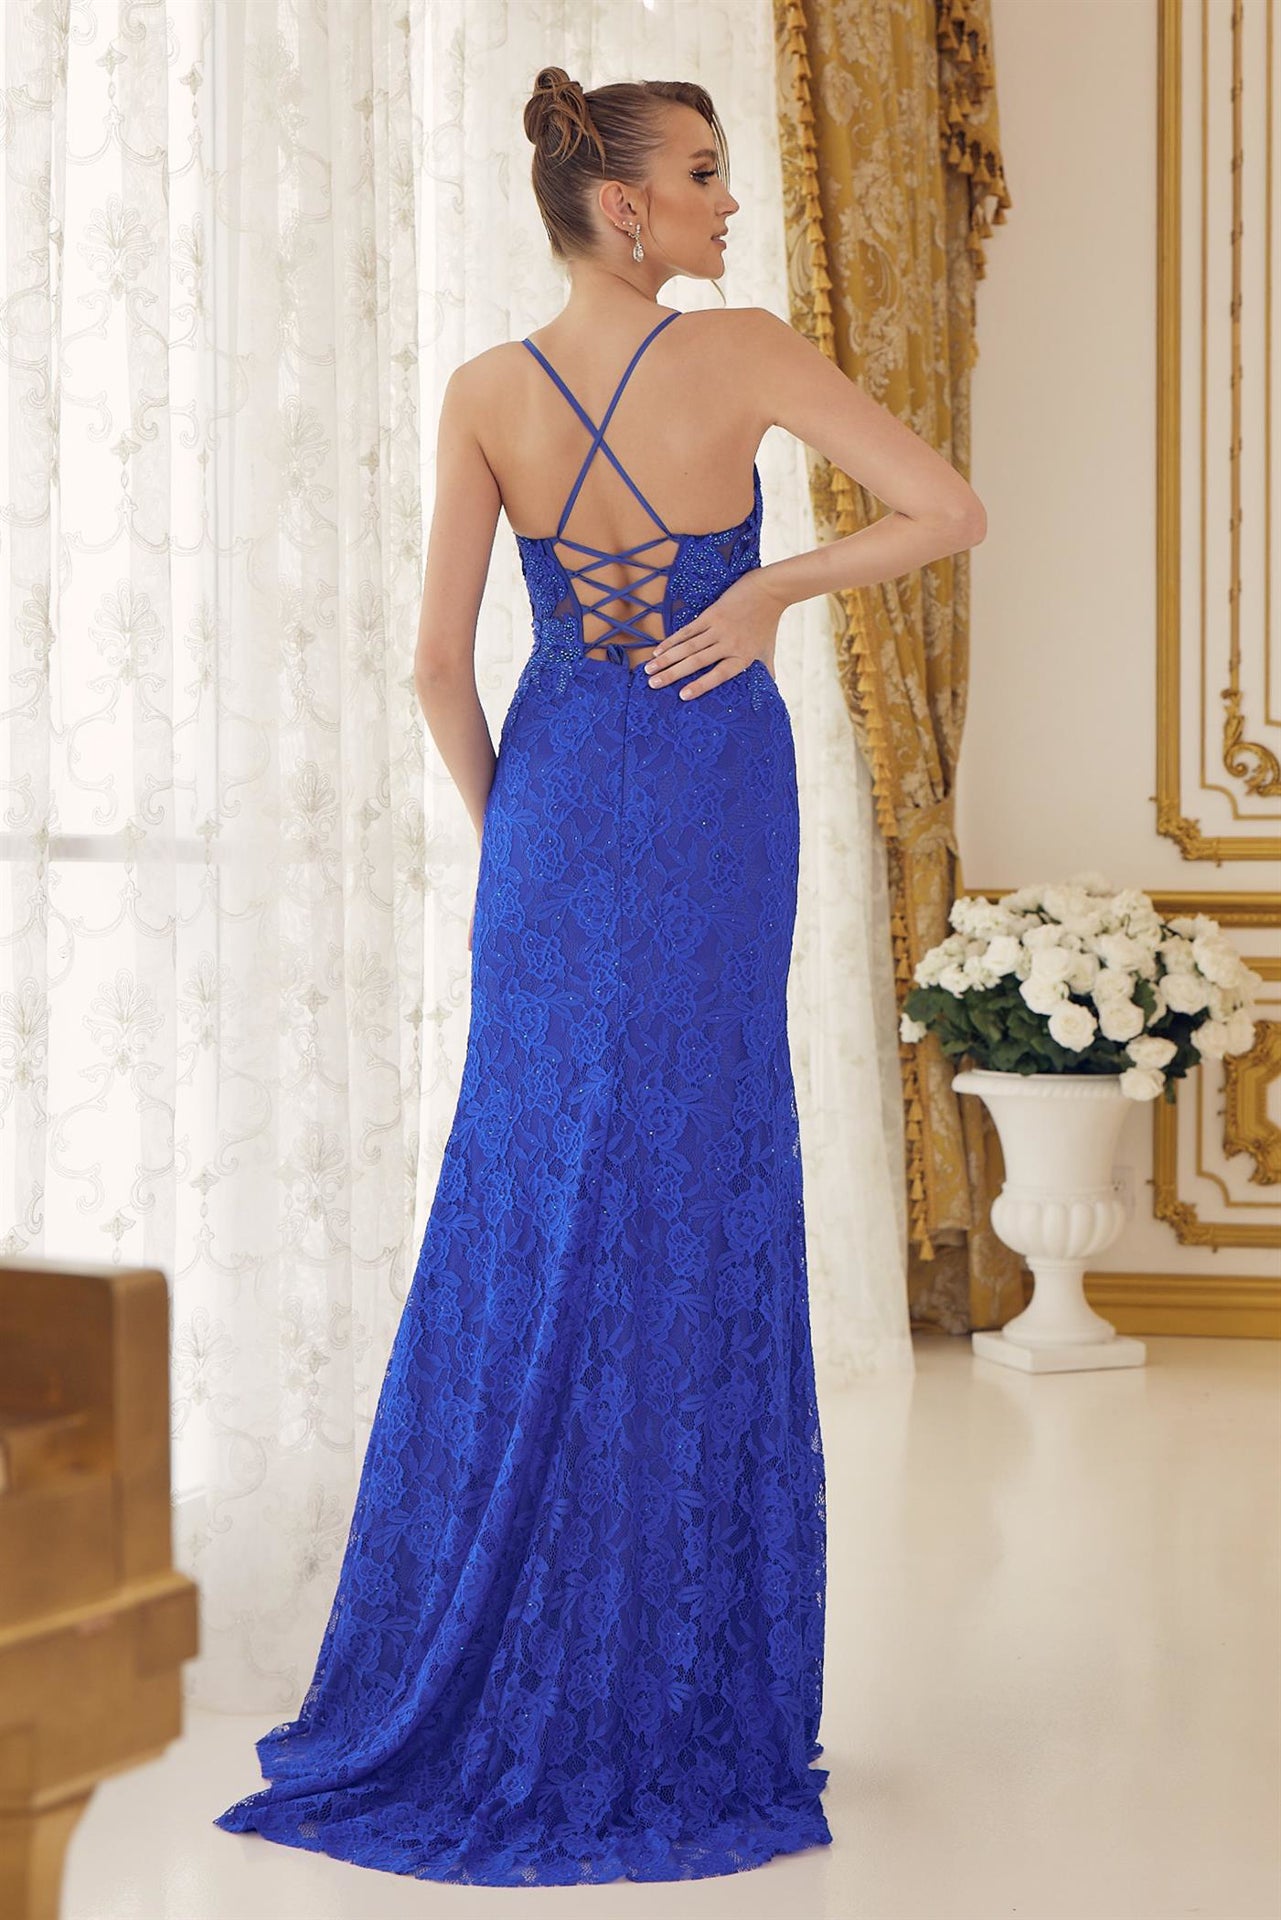 Embroidered Lace Illusion Sweetheart Open Criss Cross Back Long Prom Dress NXE1076-Prom Dress-smcfashion.com